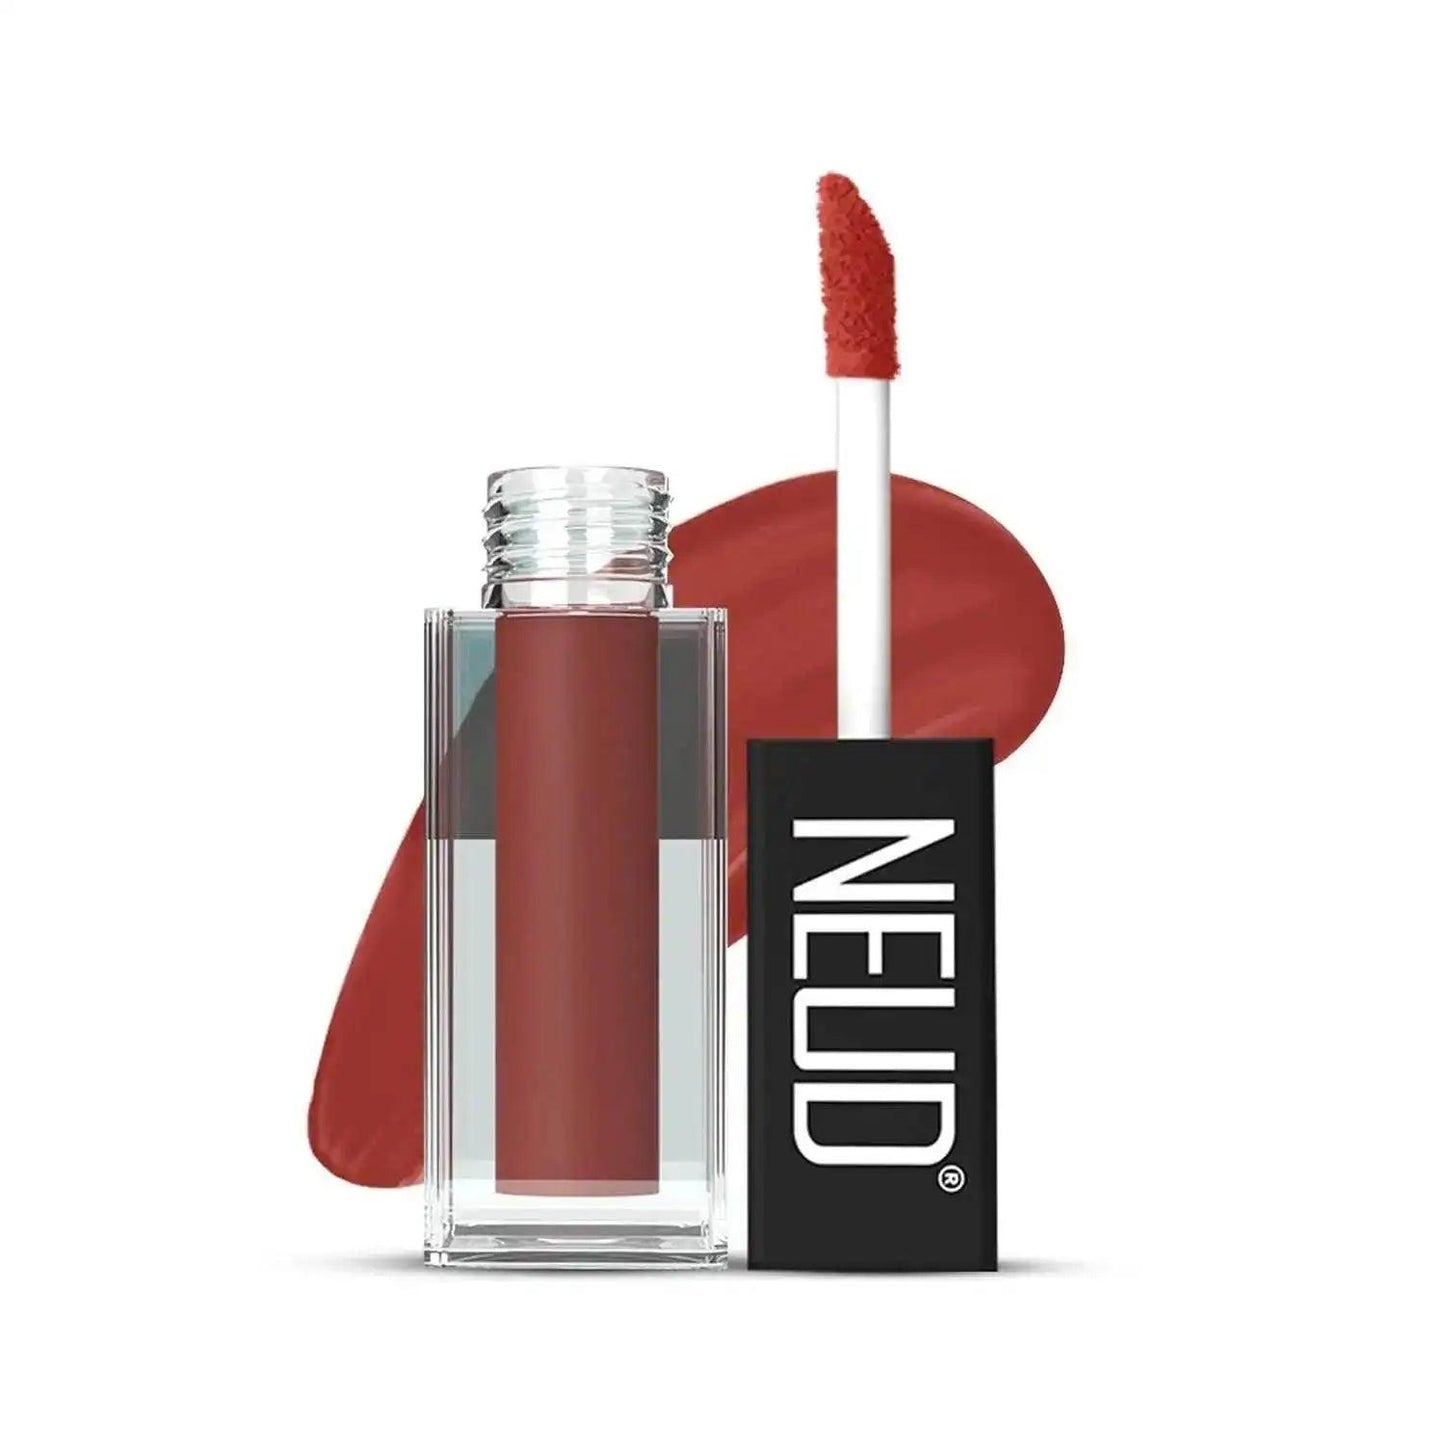 Buy 1 Pack NEUD Matte Liquid Lipstick Jolly Coral with Jojoba Oil, Vitamin E and Almond Oil - Smudge Proof 12-hour Stay Formula with Free Lip Gloss - everteen-neud.com